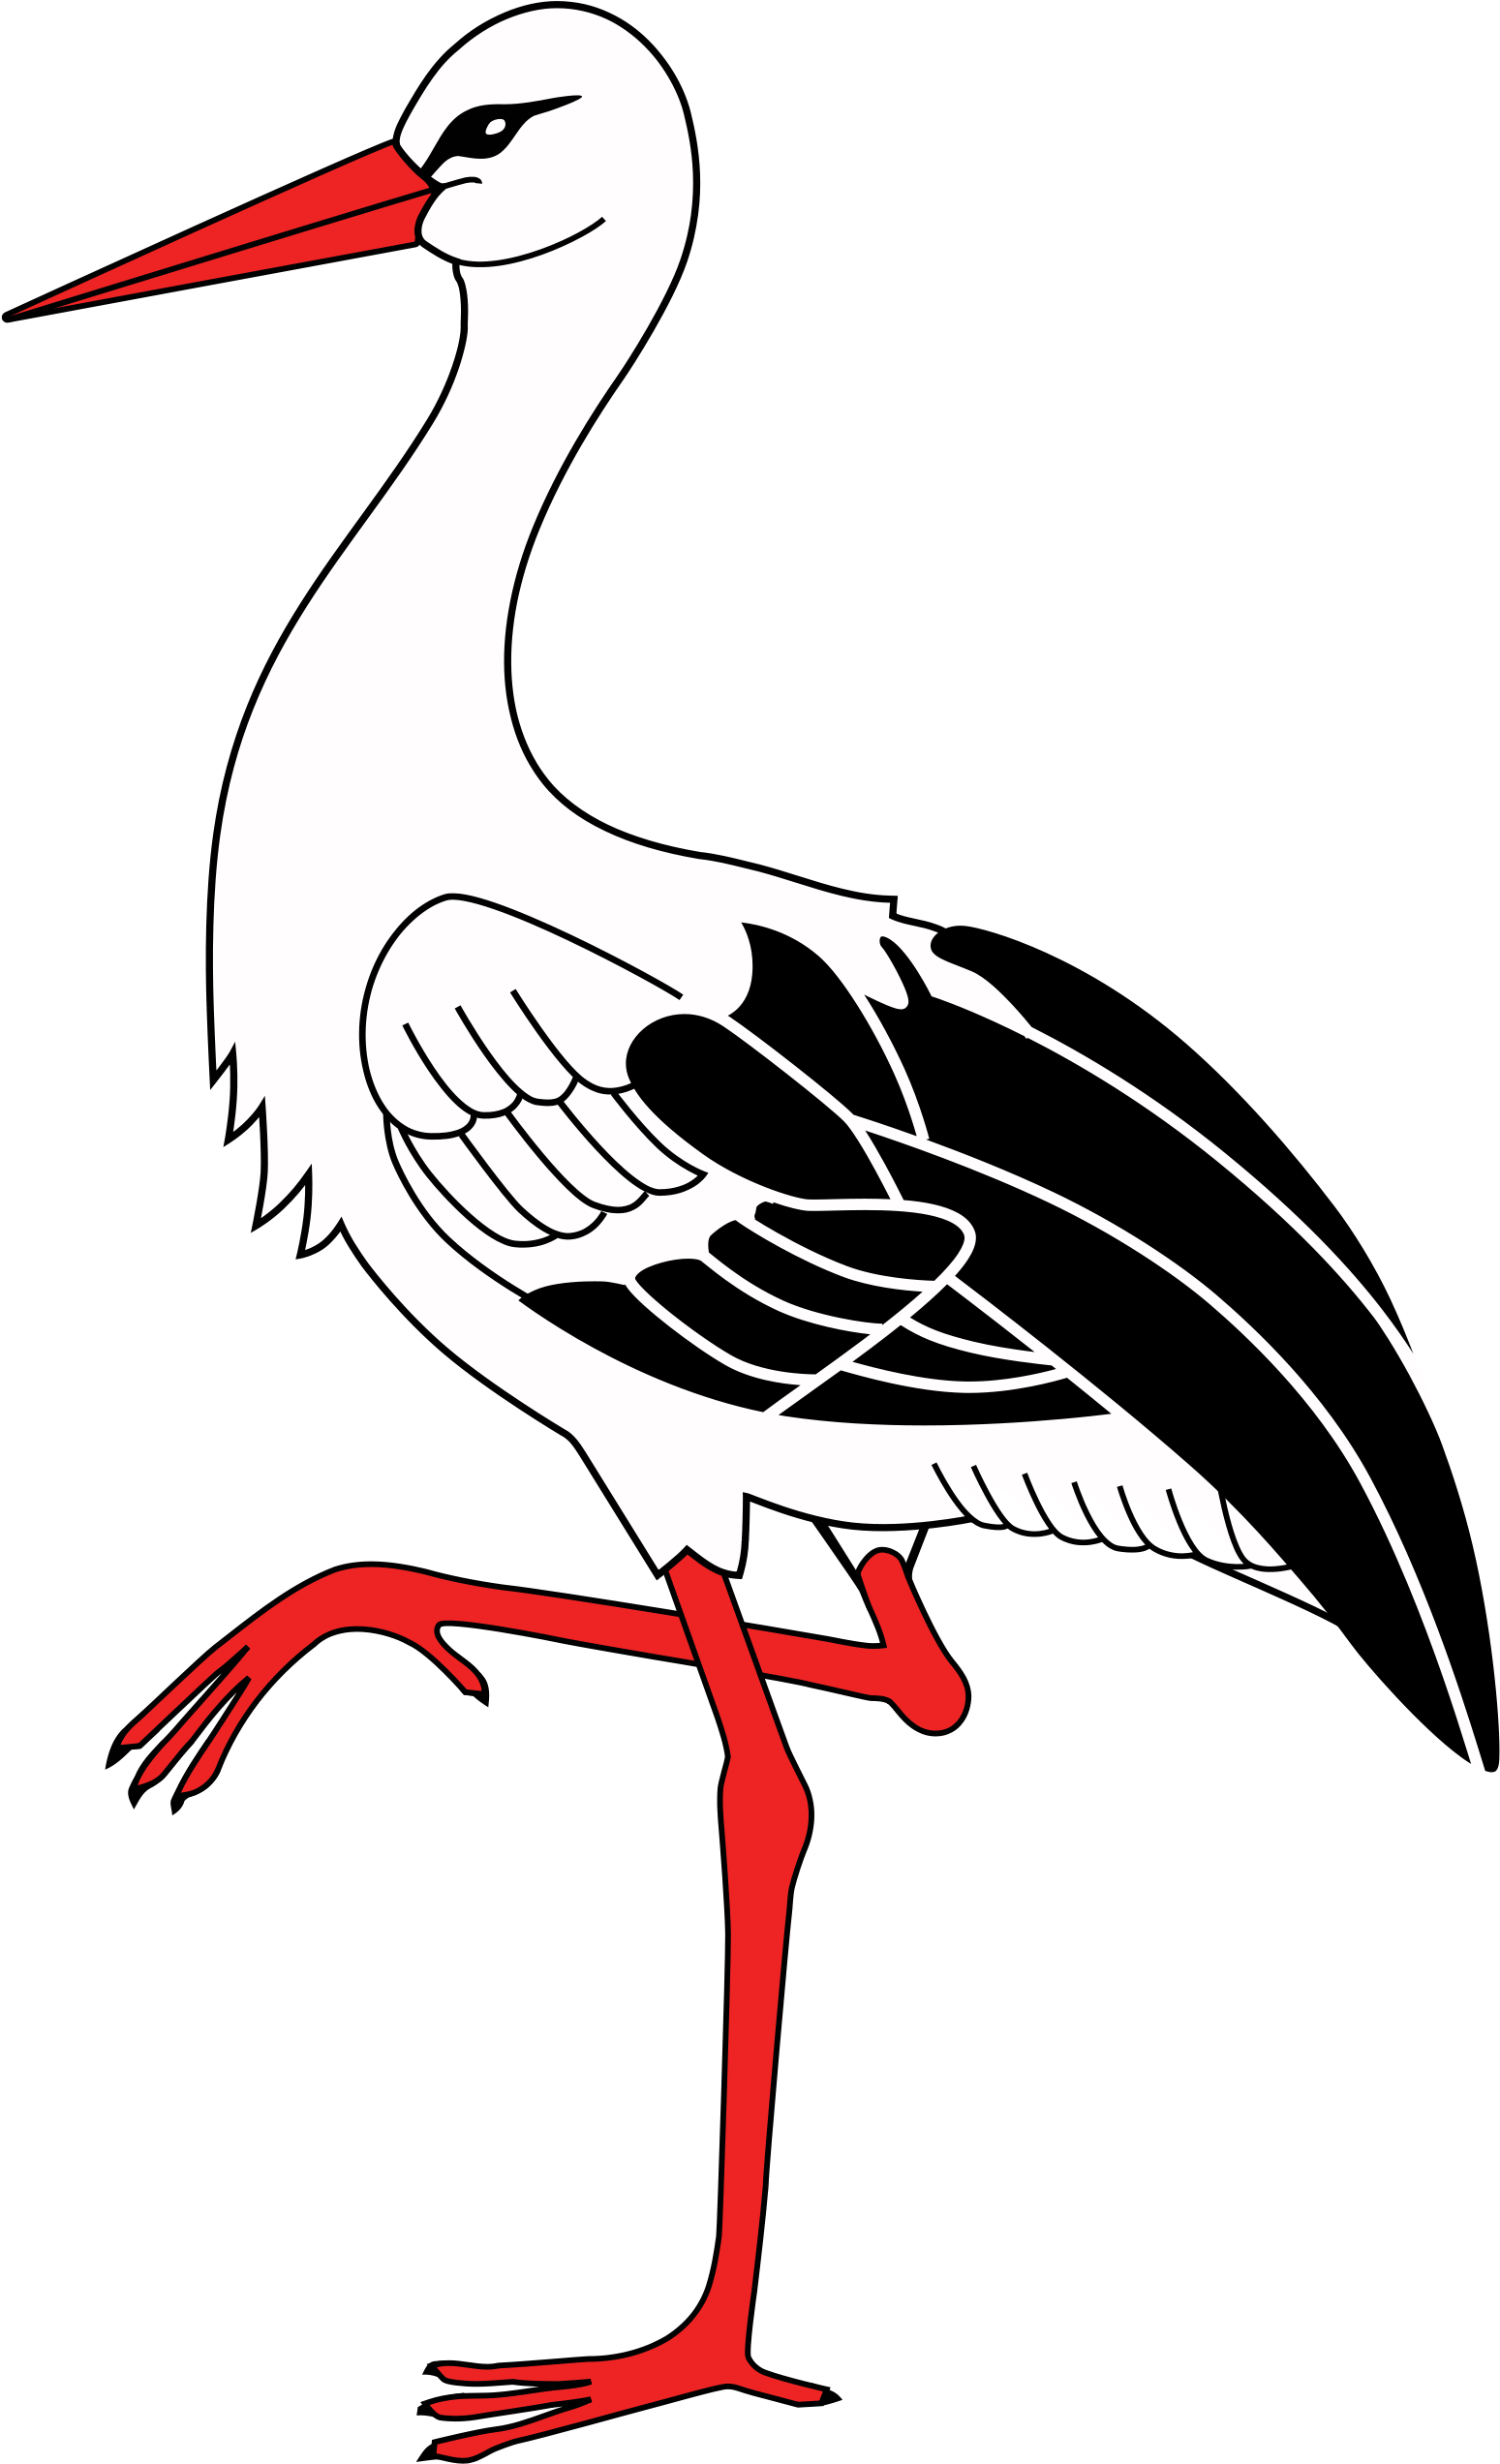 A White Bird With Black And Red Legs